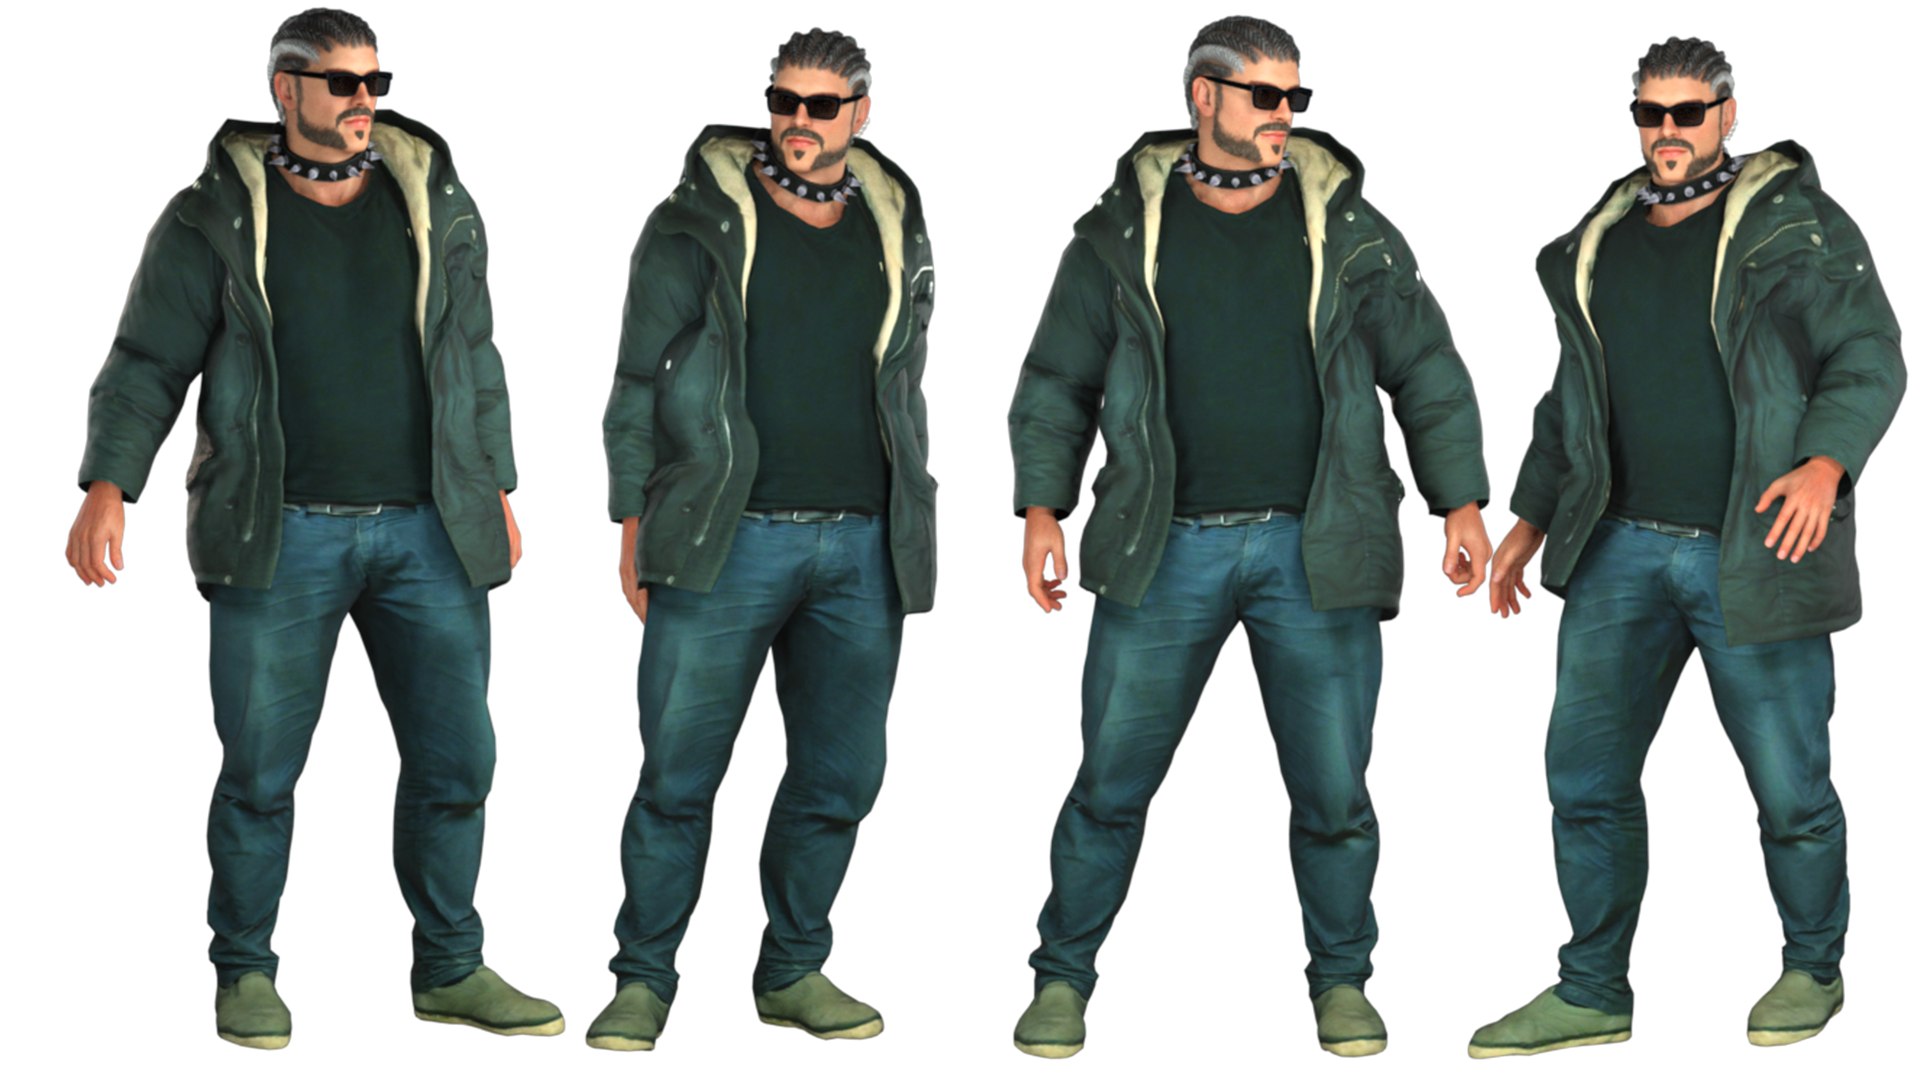 Realistic Rigged Male-Jack Character 3D Model 3D model - TurboSquid 2113263